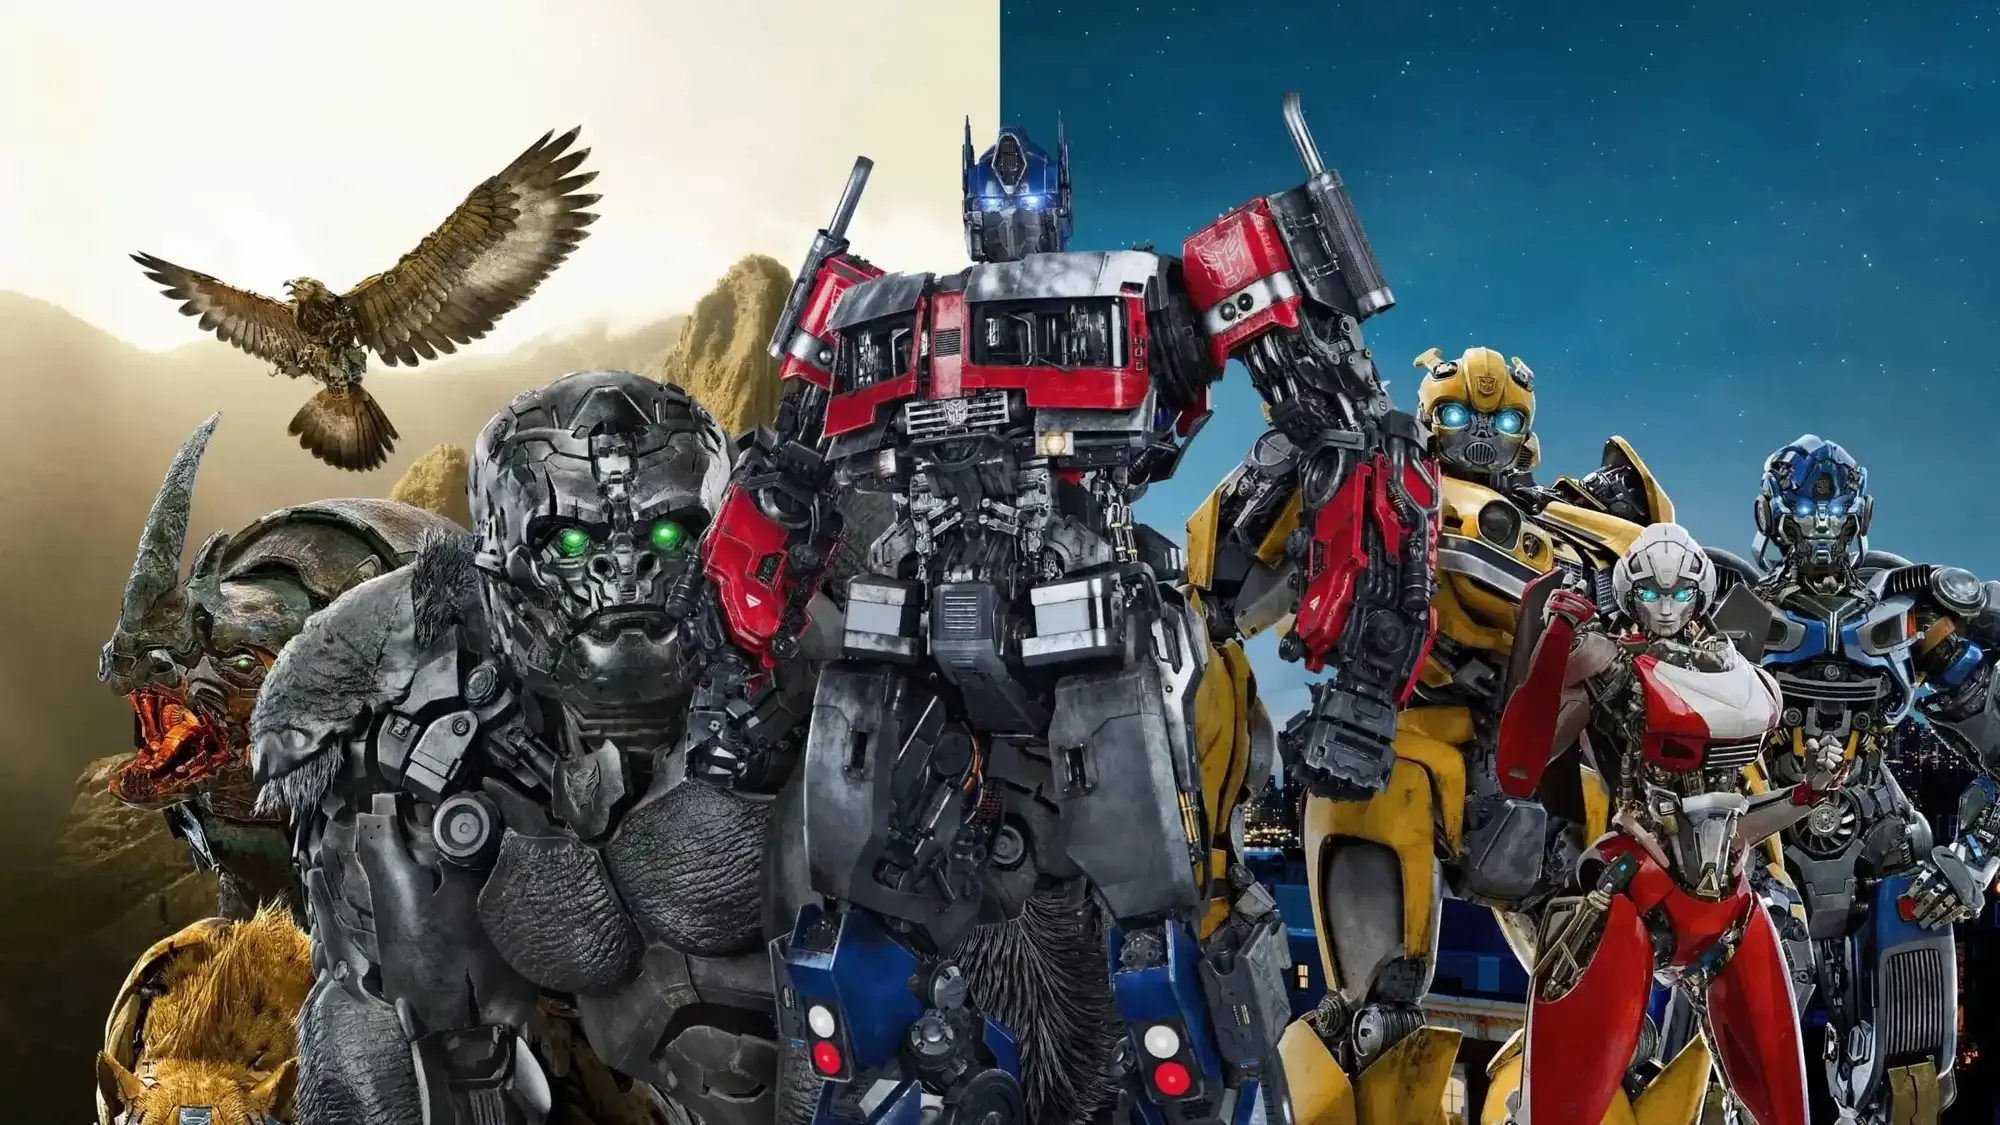 Transformers: Rise of the Beasts movie review